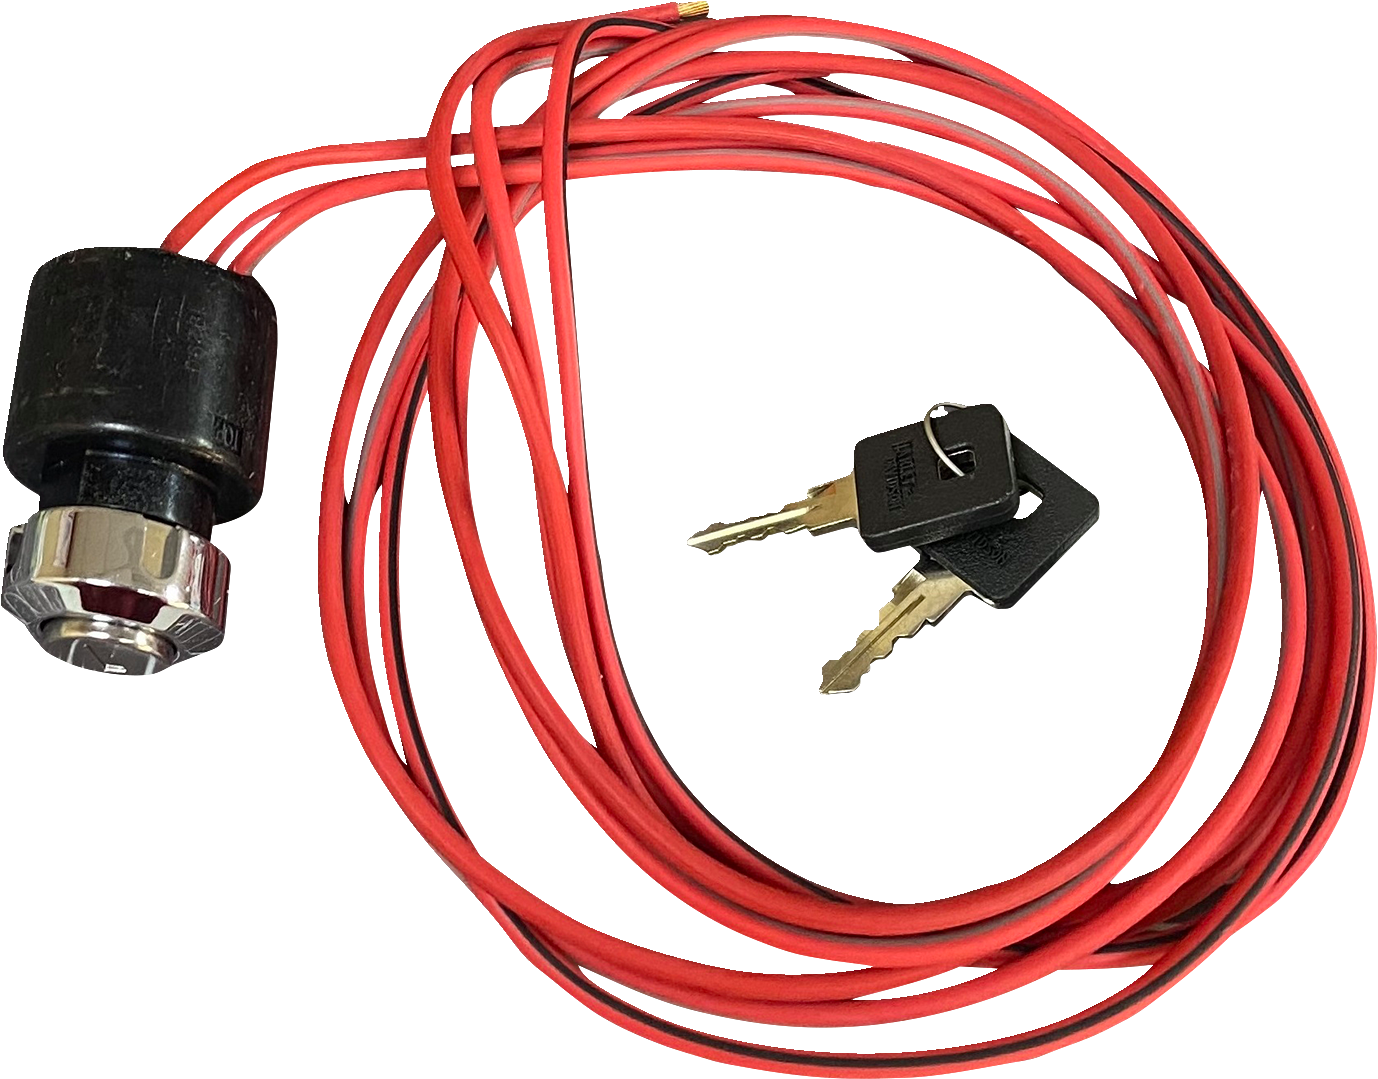 DRAG SPECIALTIES Ignition Switch - Harley Davidson E21-0220